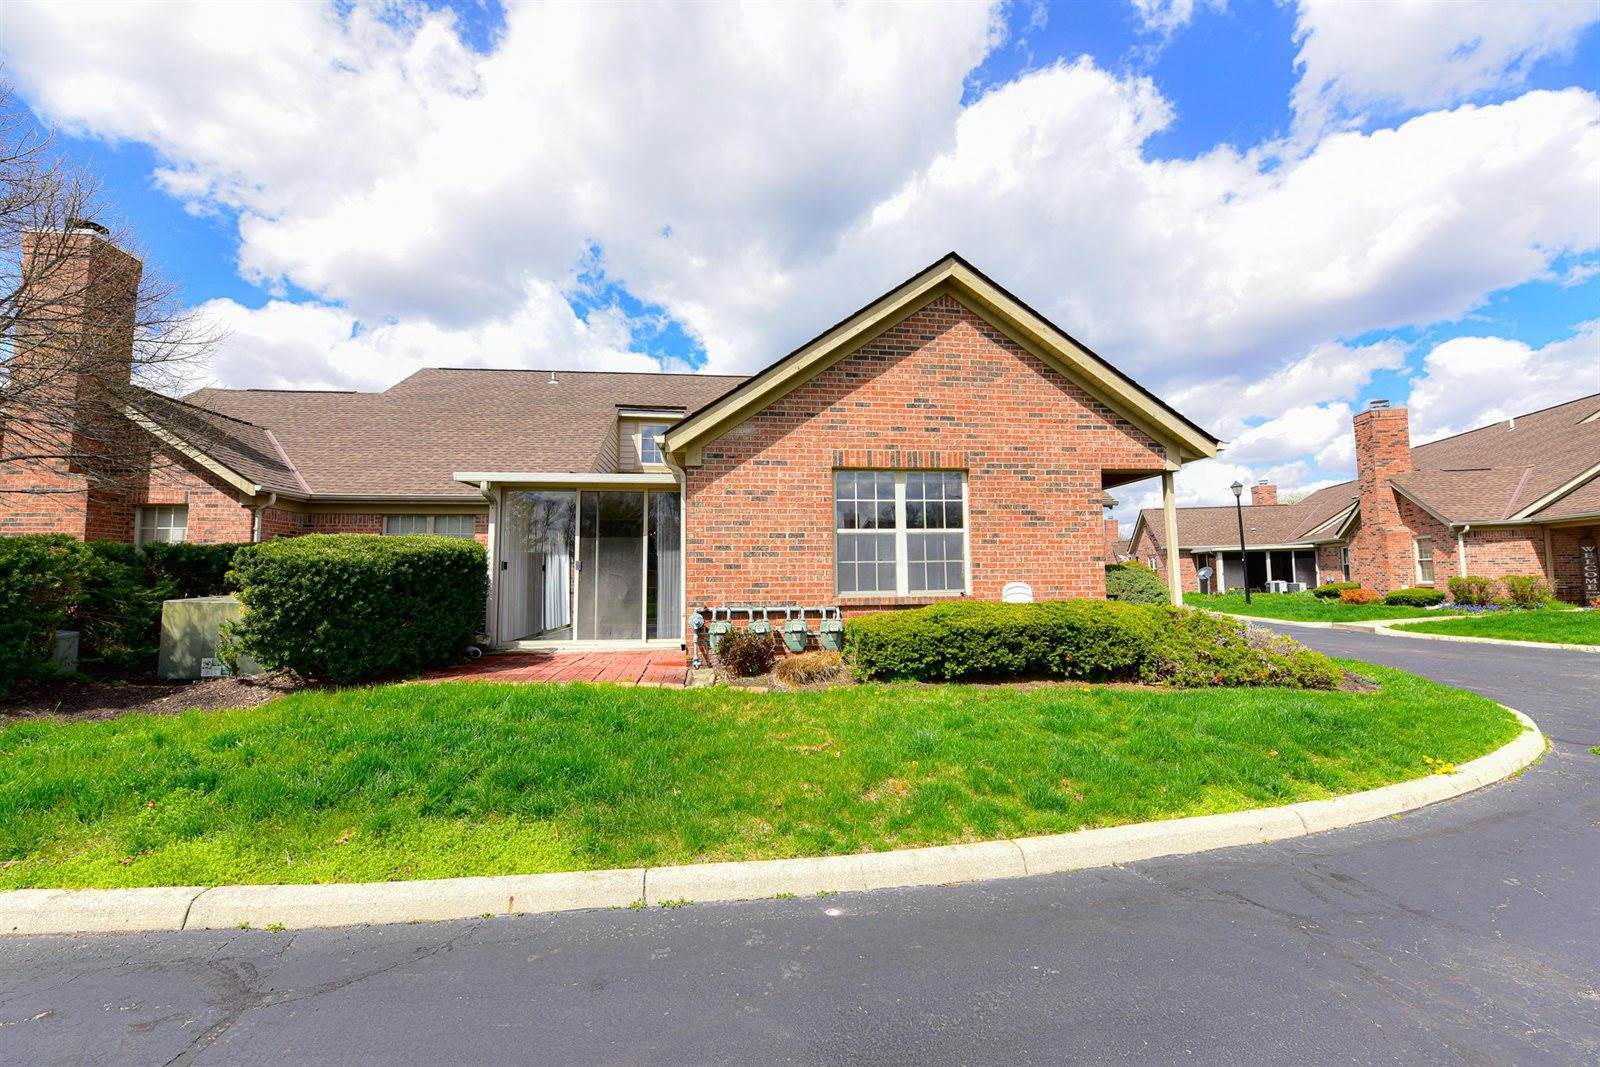 9410 Clermont Circle, Powell, OH 43065